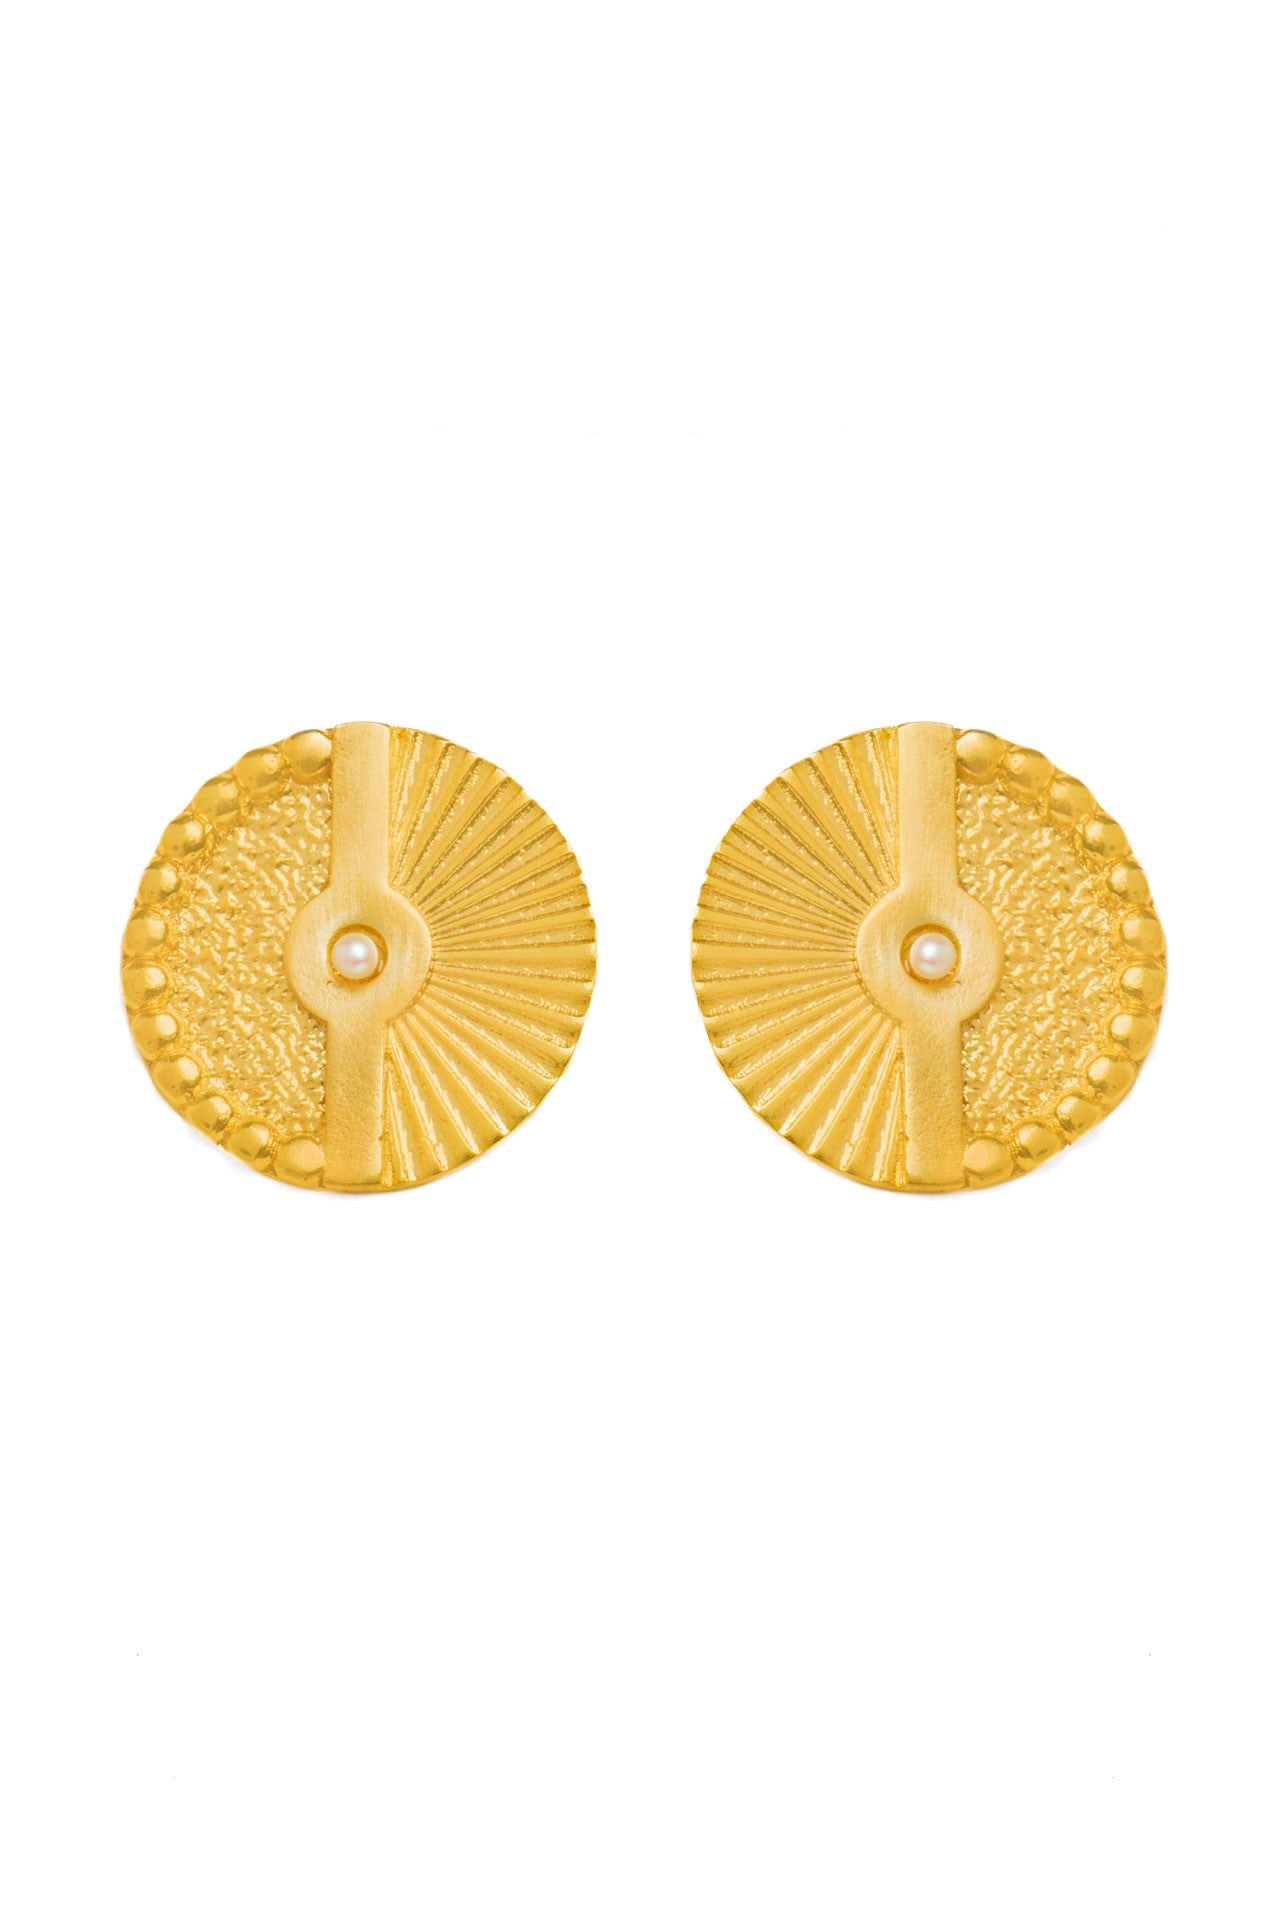 Isabella earrings by Pearl Martini